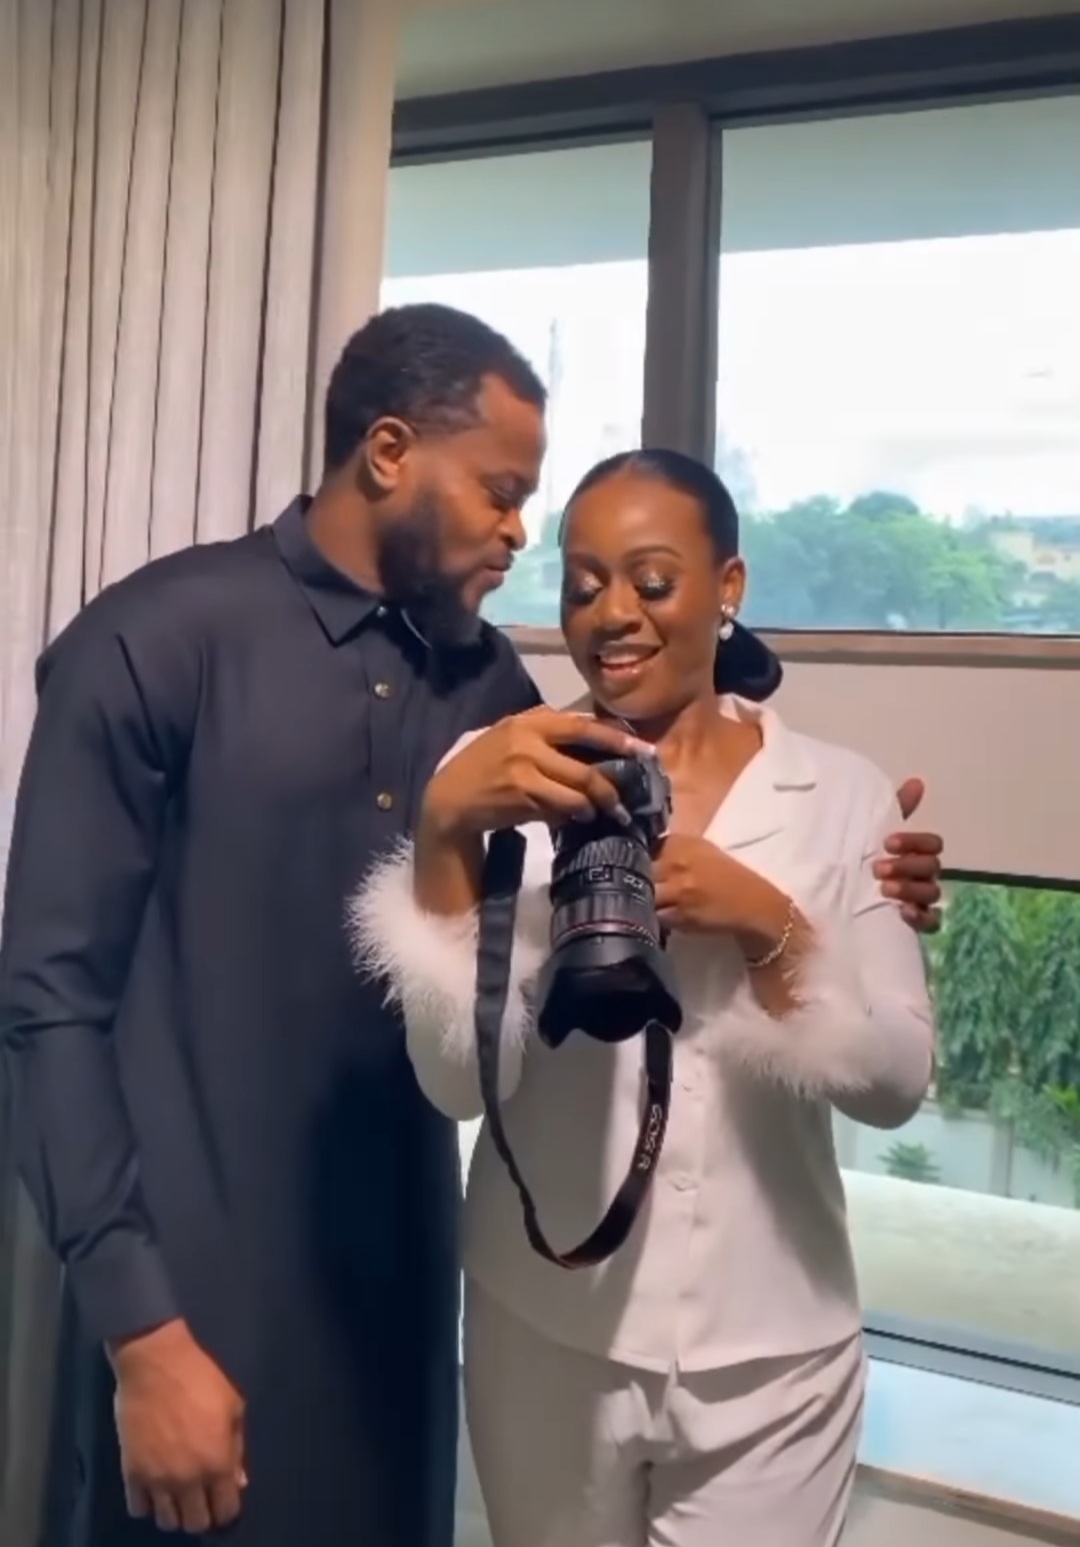 This Beautiful Bride Taking Images of Her Sweetheart Will Make Your Day!